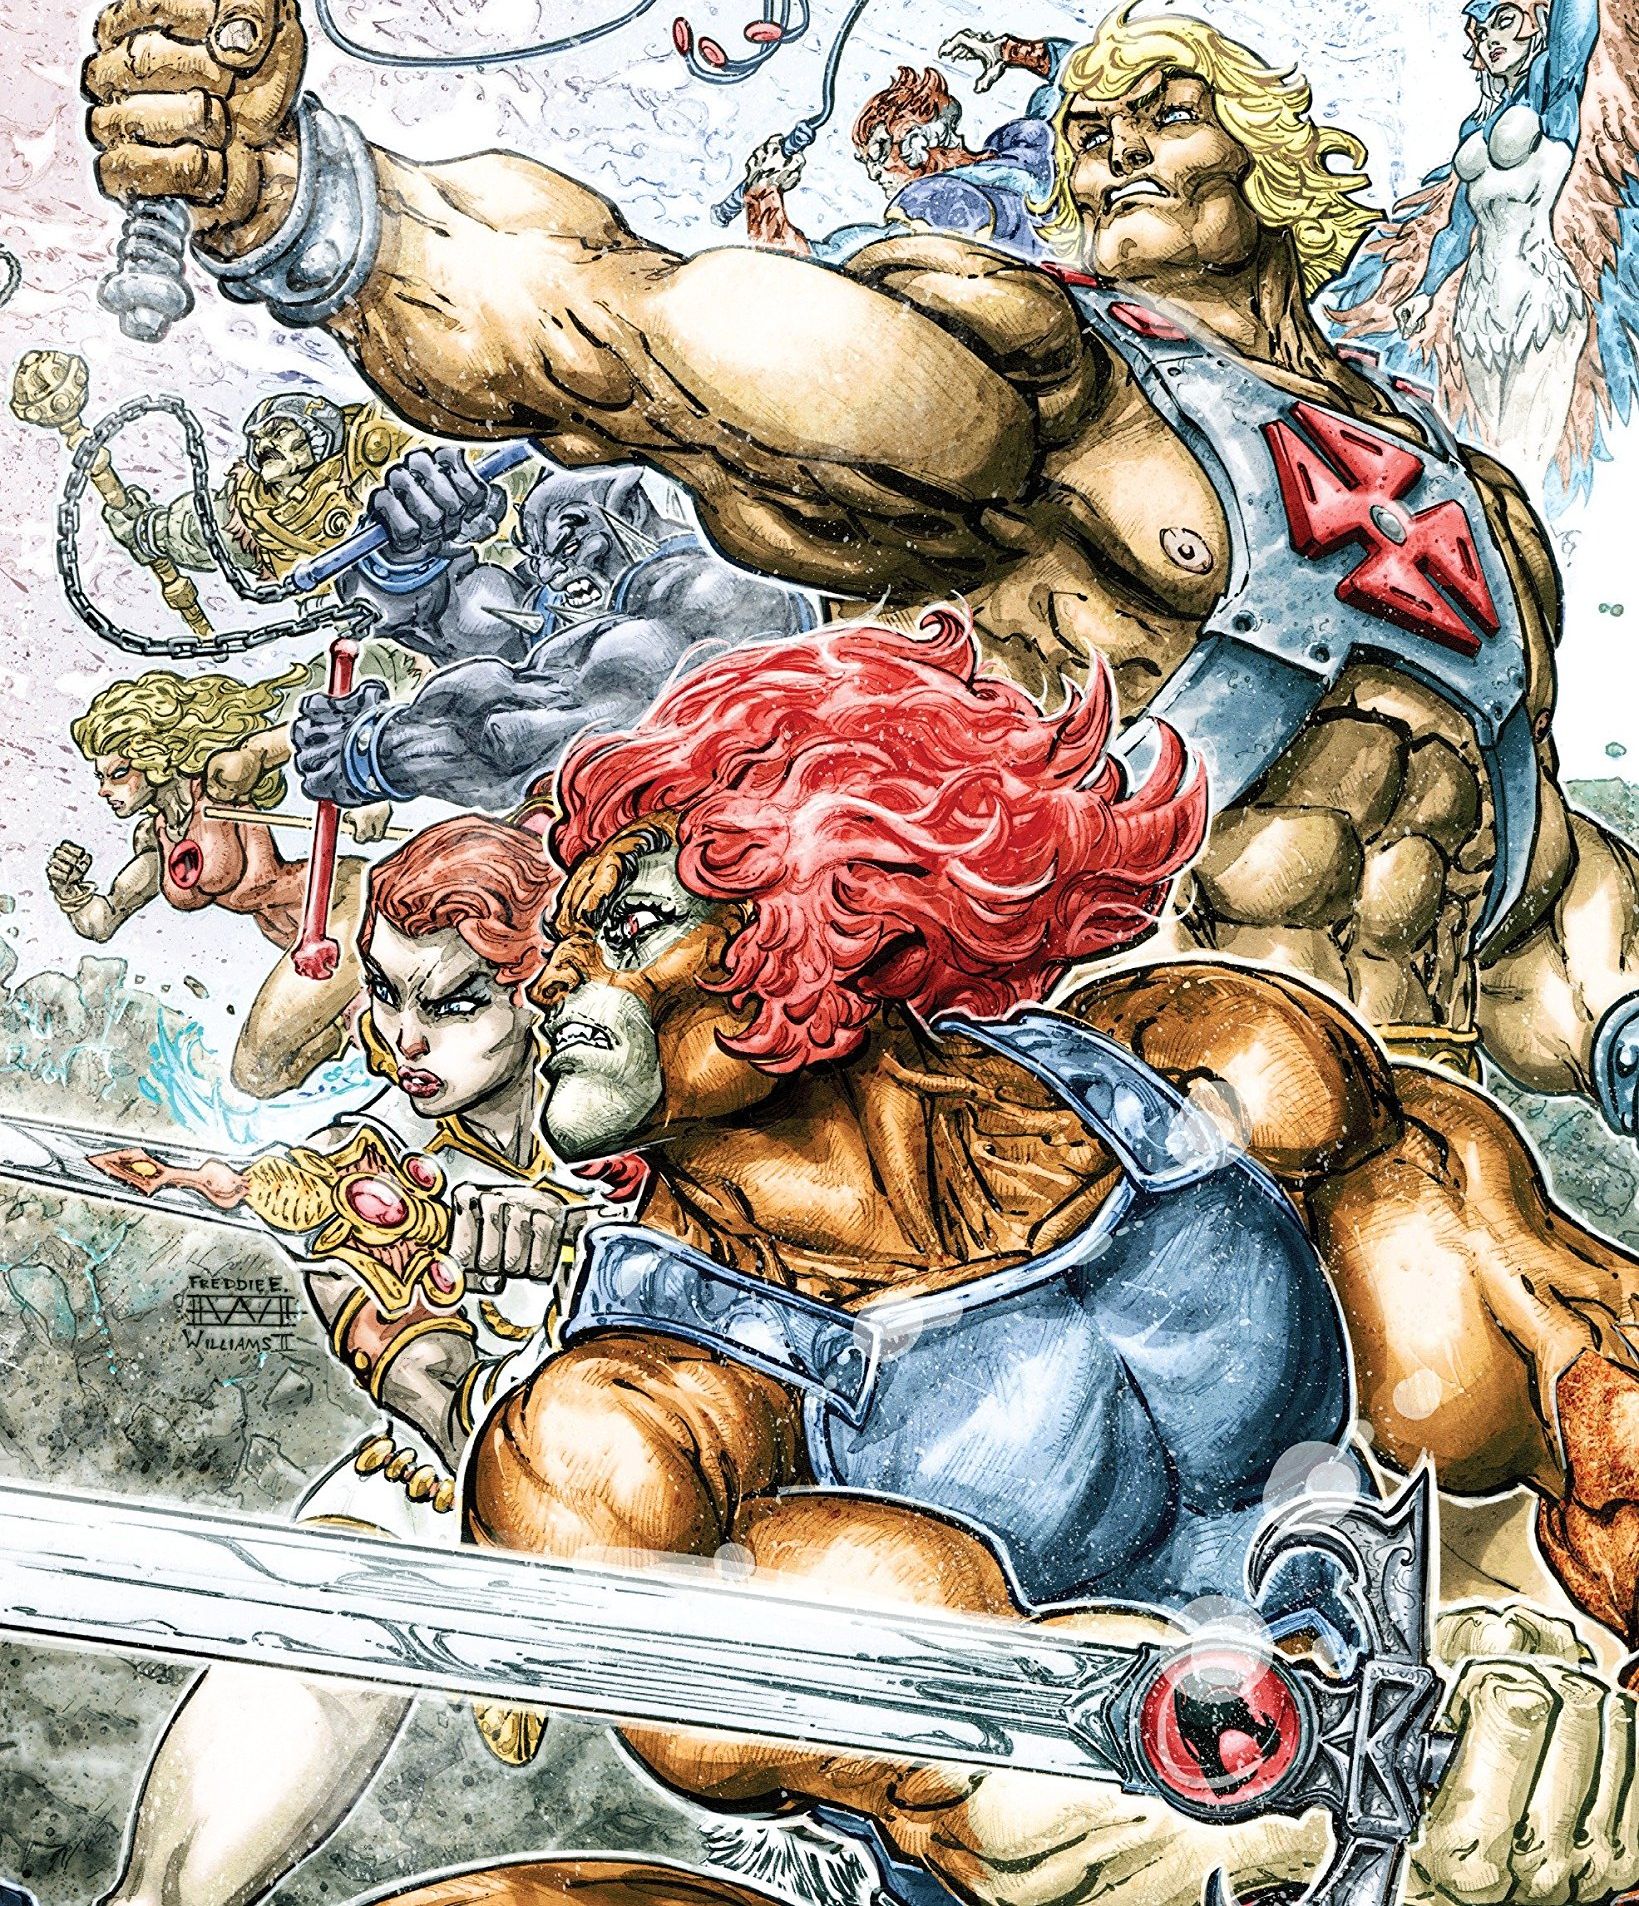 He-ManThunderCats Issue #1